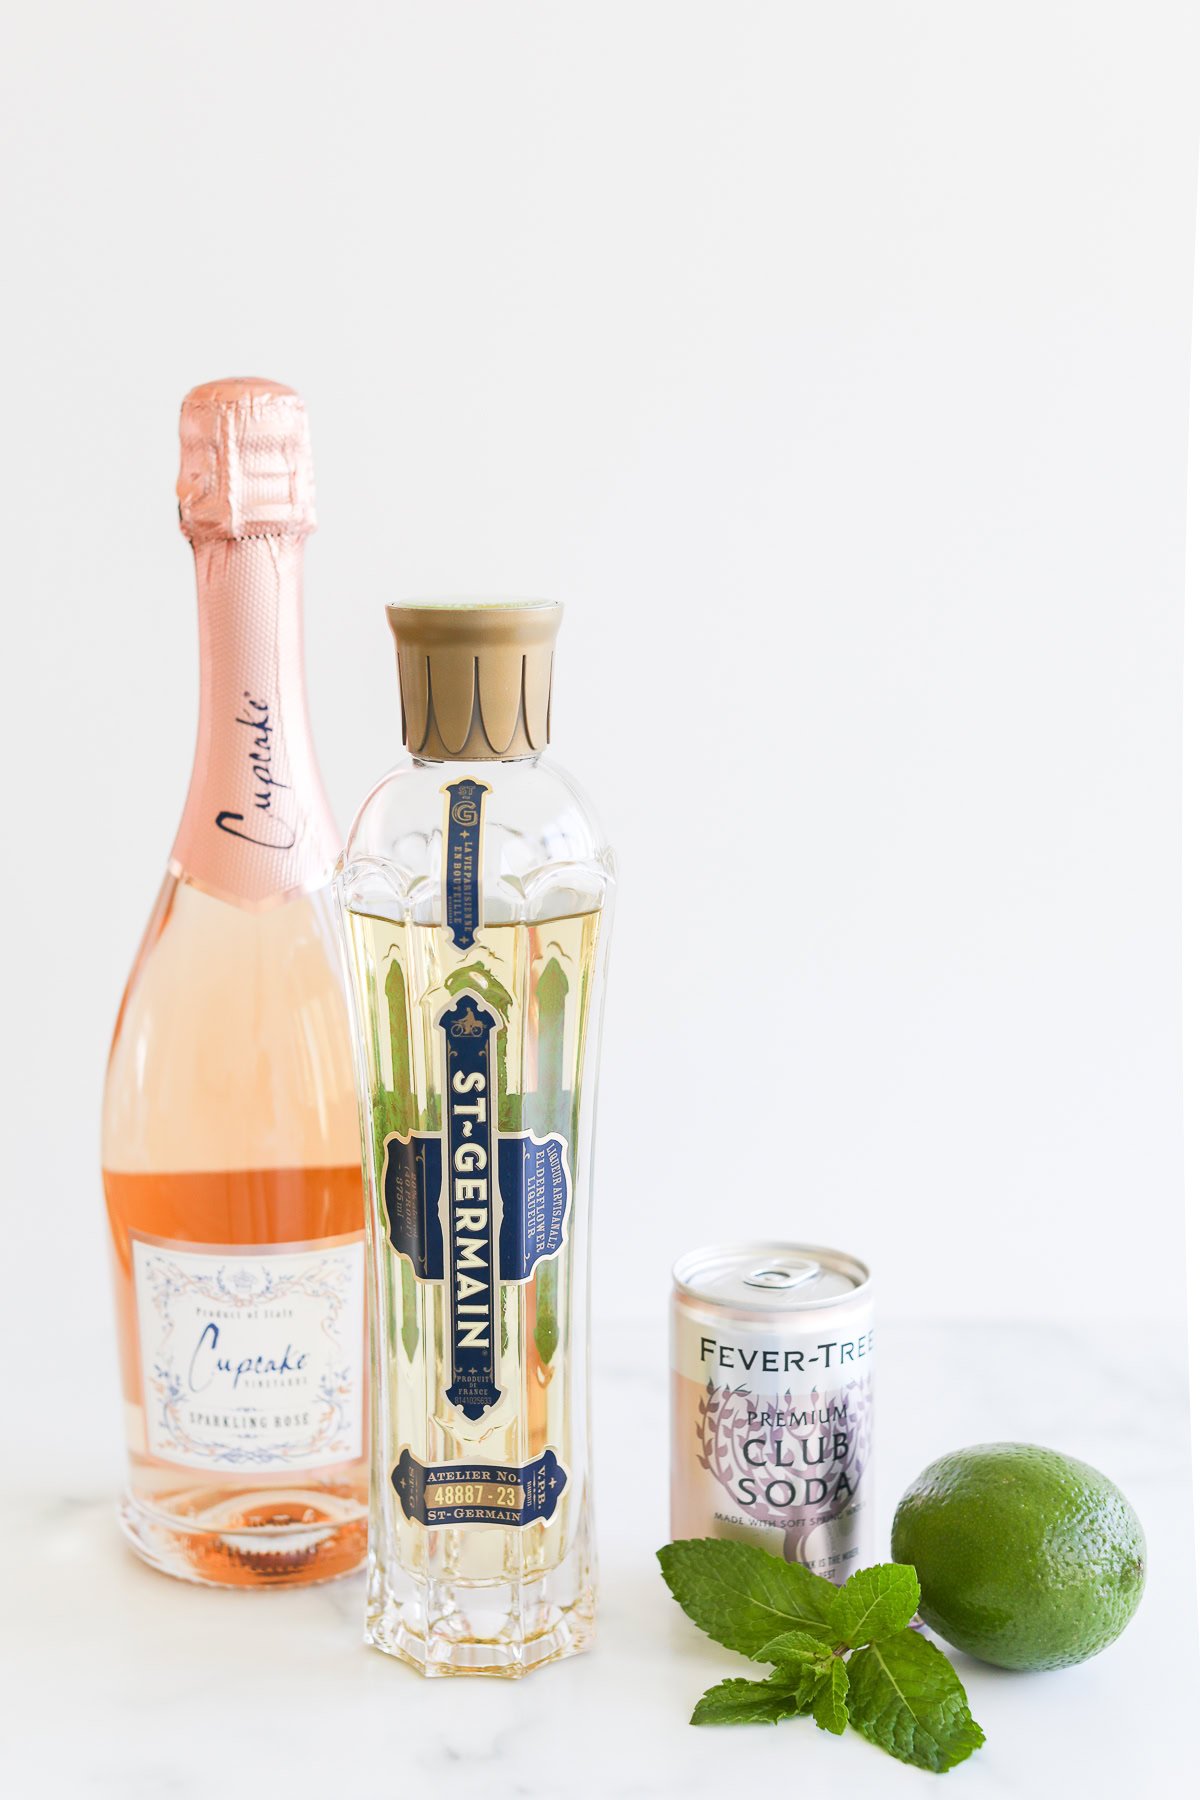 A bottle of rosé sparkling wine, a bottle of St-Germain liqueur, a can of club soda, a lime, and mint leaves arranged on a white surface.